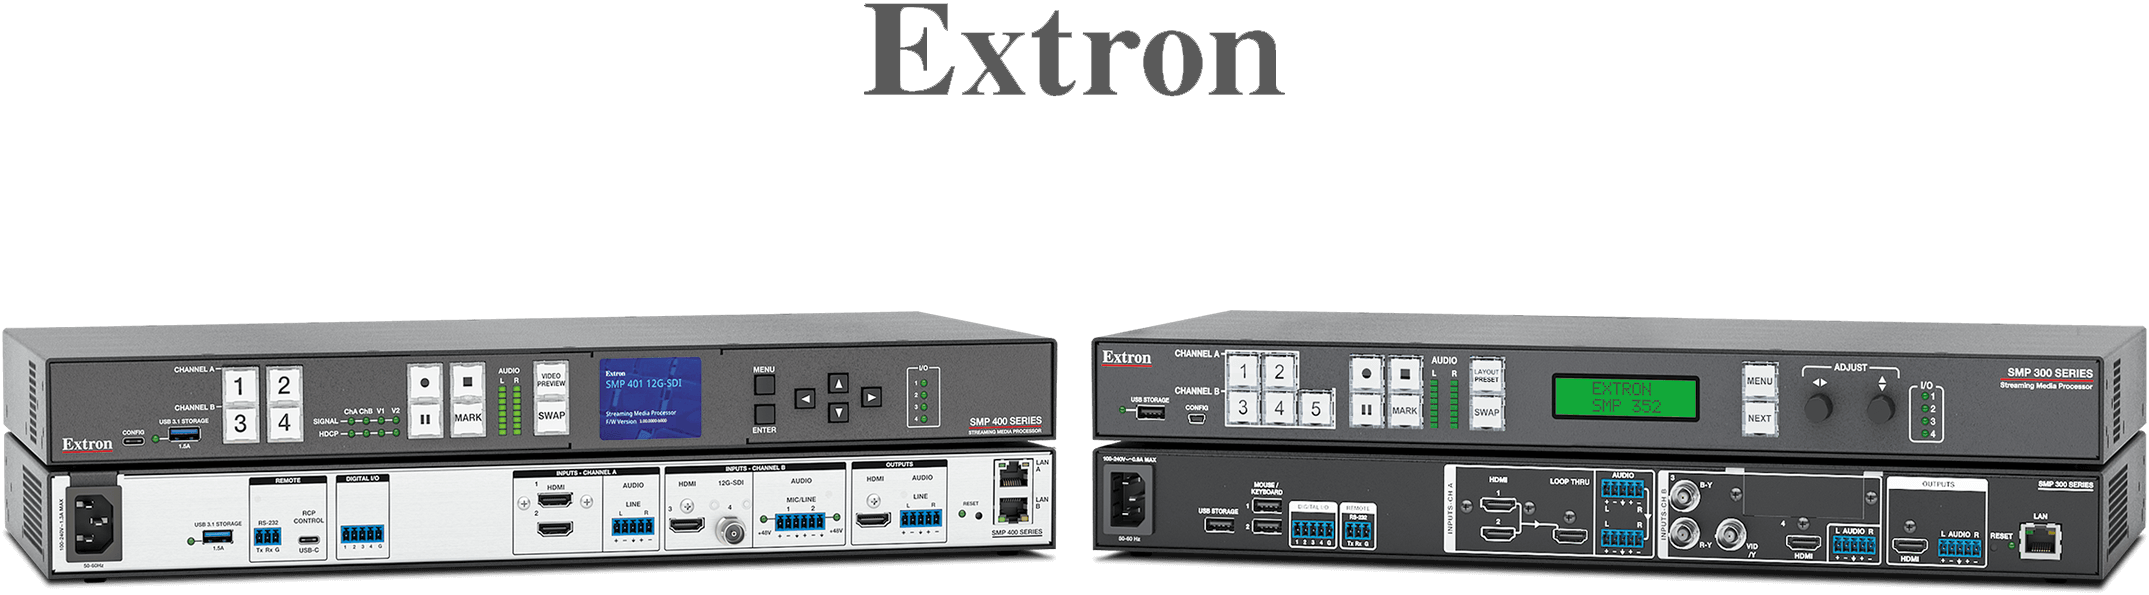 YuJa and Extron Hardware Devices.